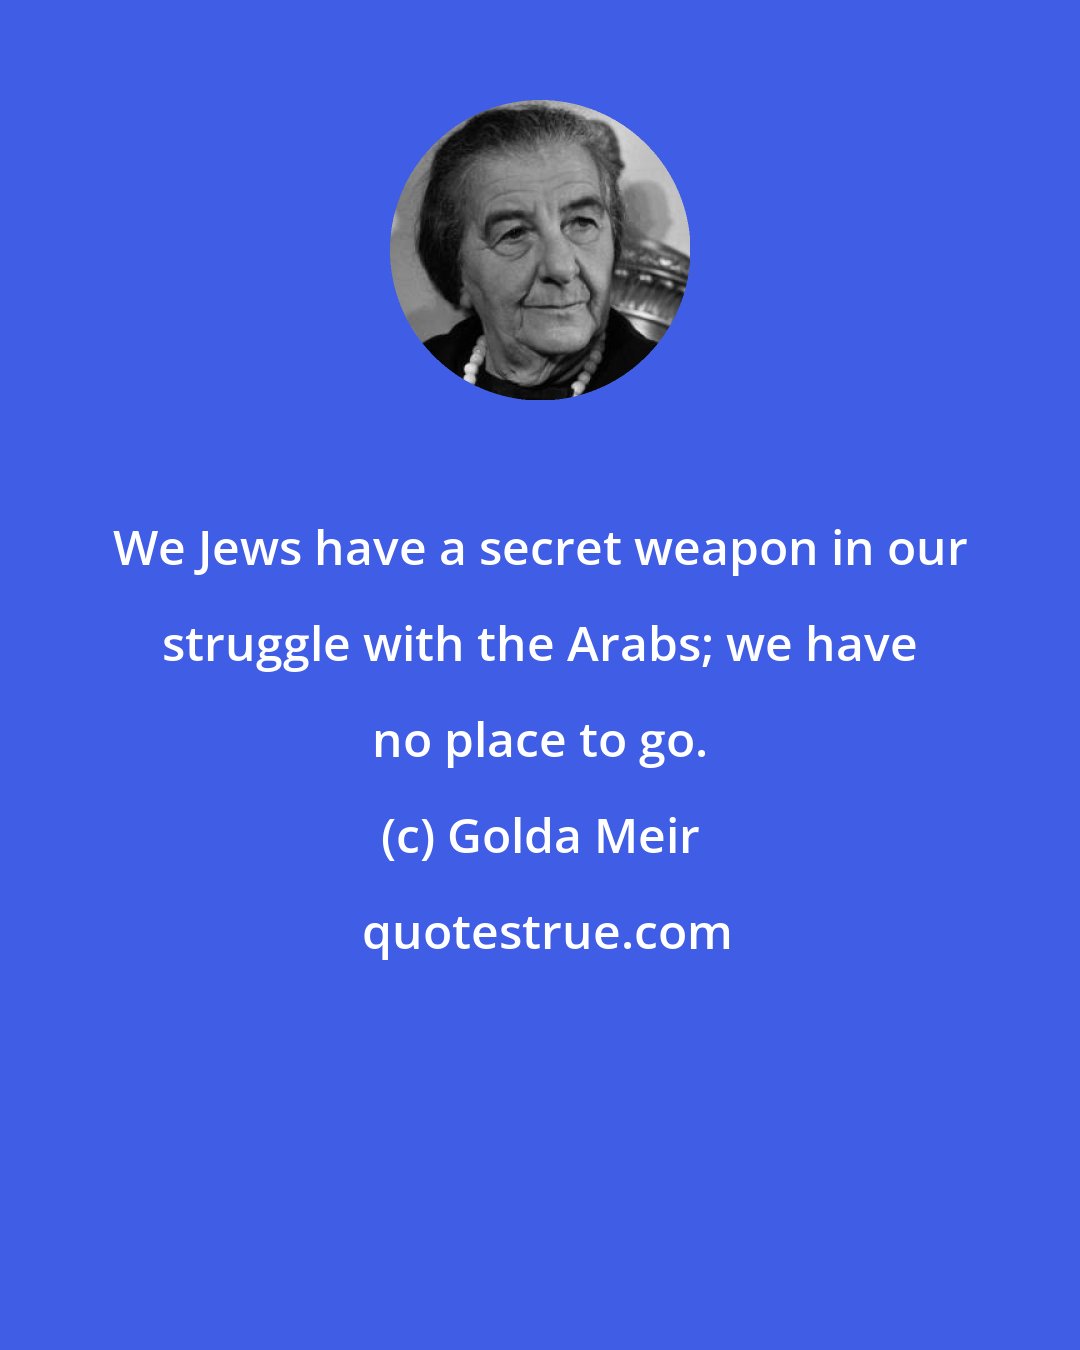 Golda Meir: We Jews have a secret weapon in our struggle with the Arabs; we have no place to go.